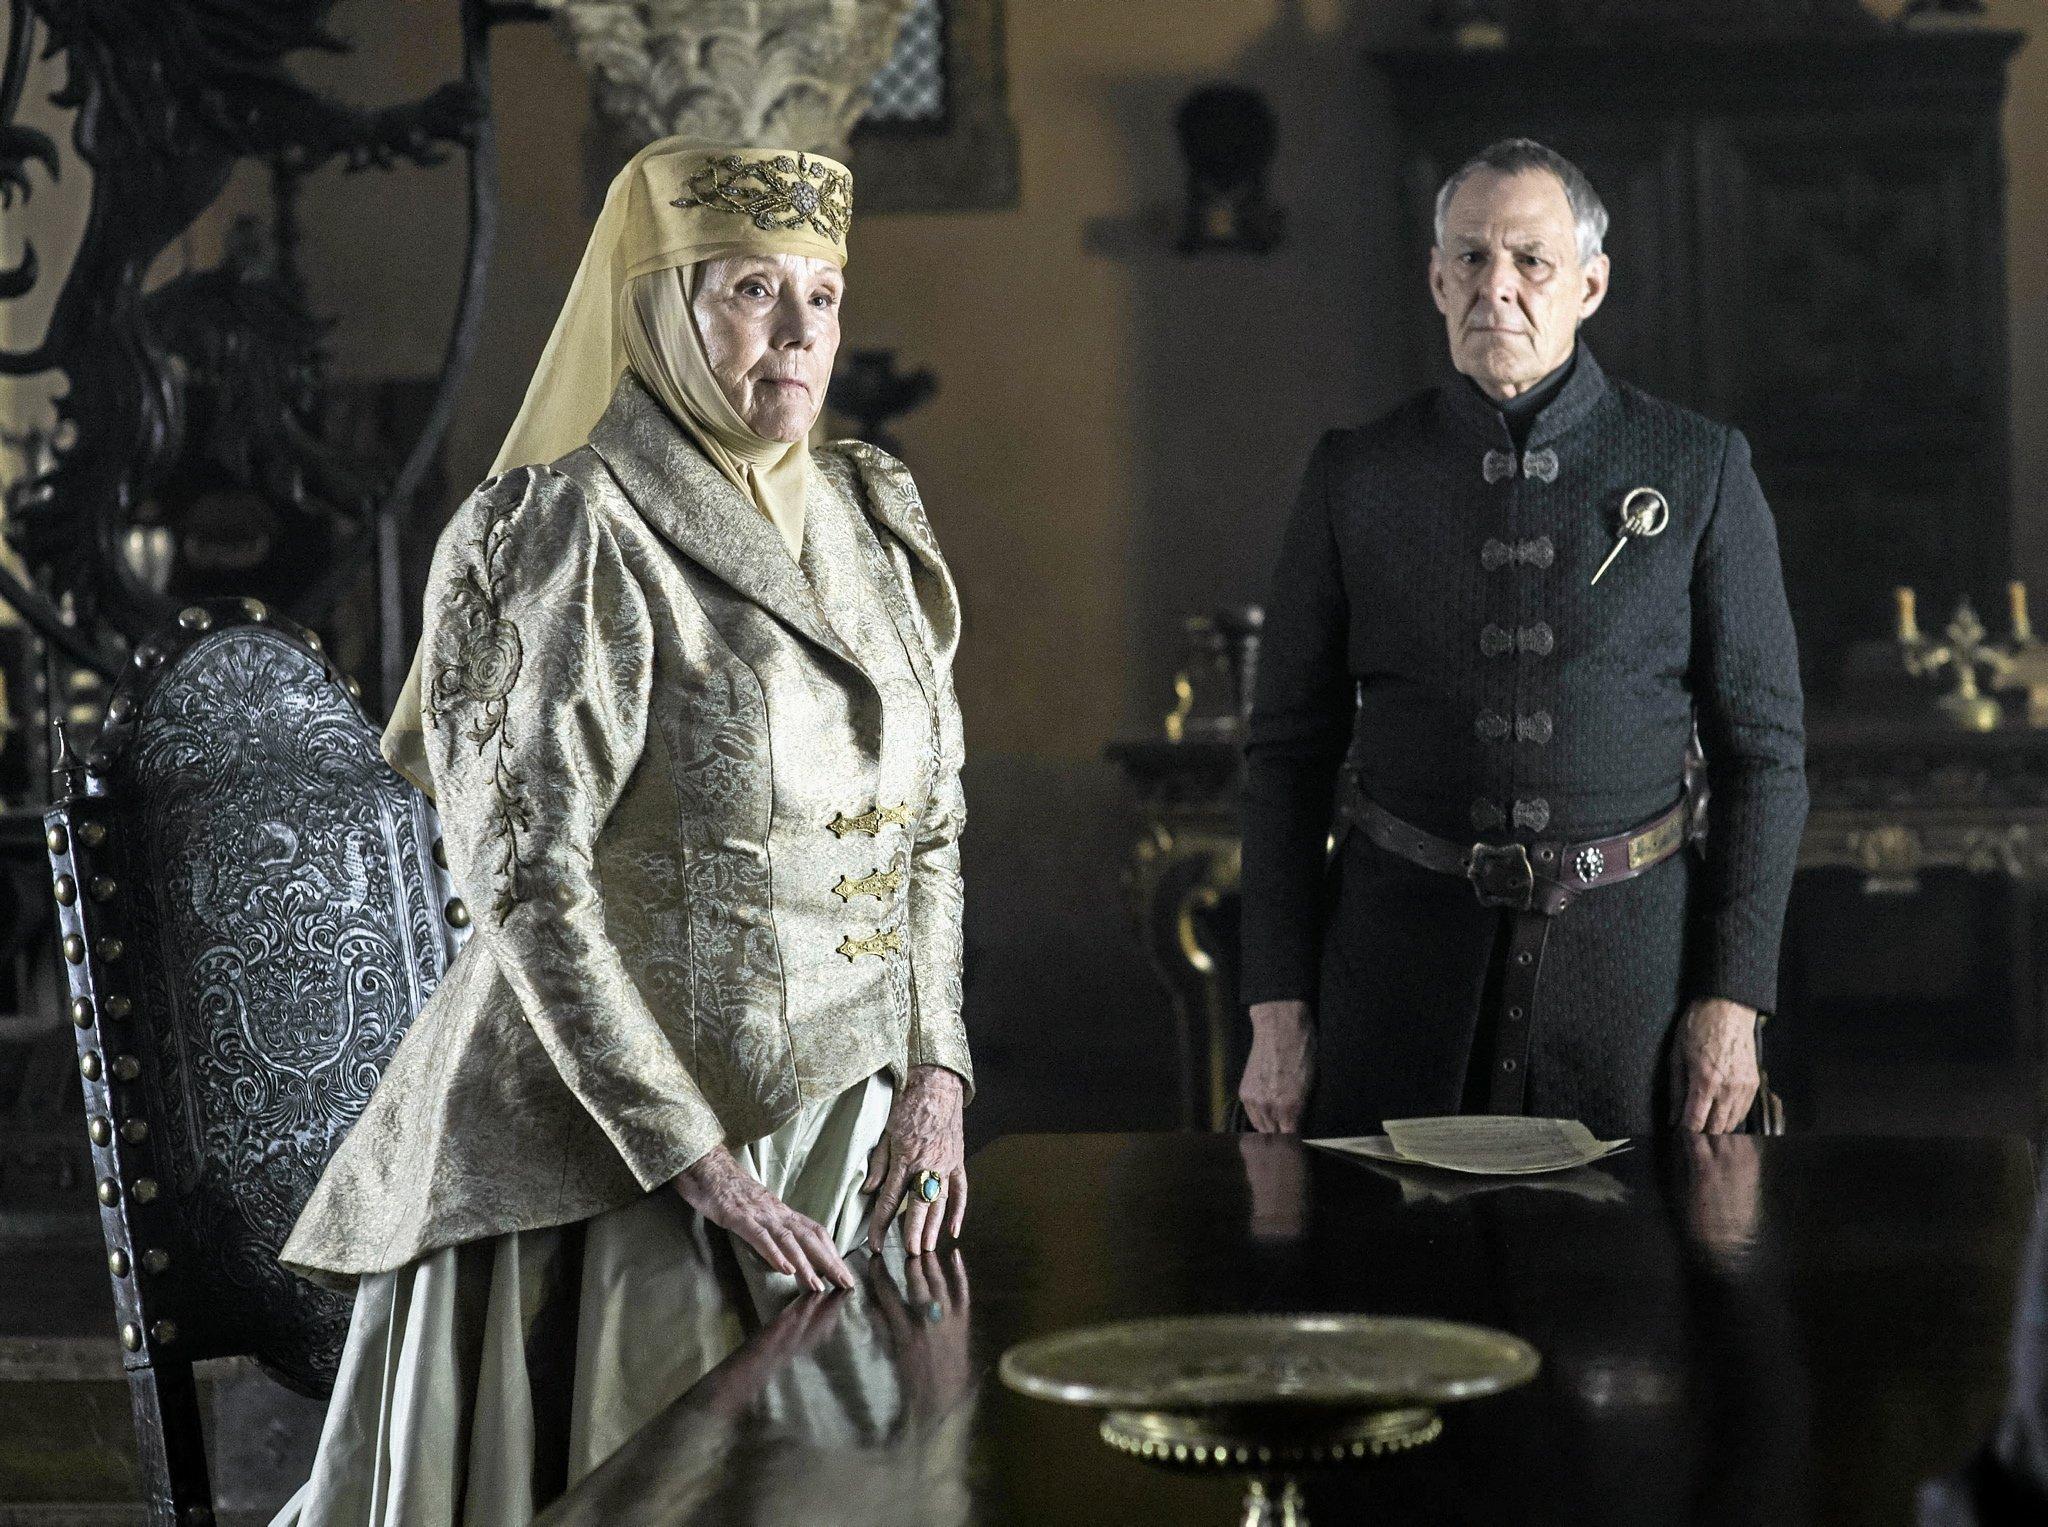 The Queen of Thorns, Lady Olenna Tyrell is the ruthless matriarch of House Tyrell. 